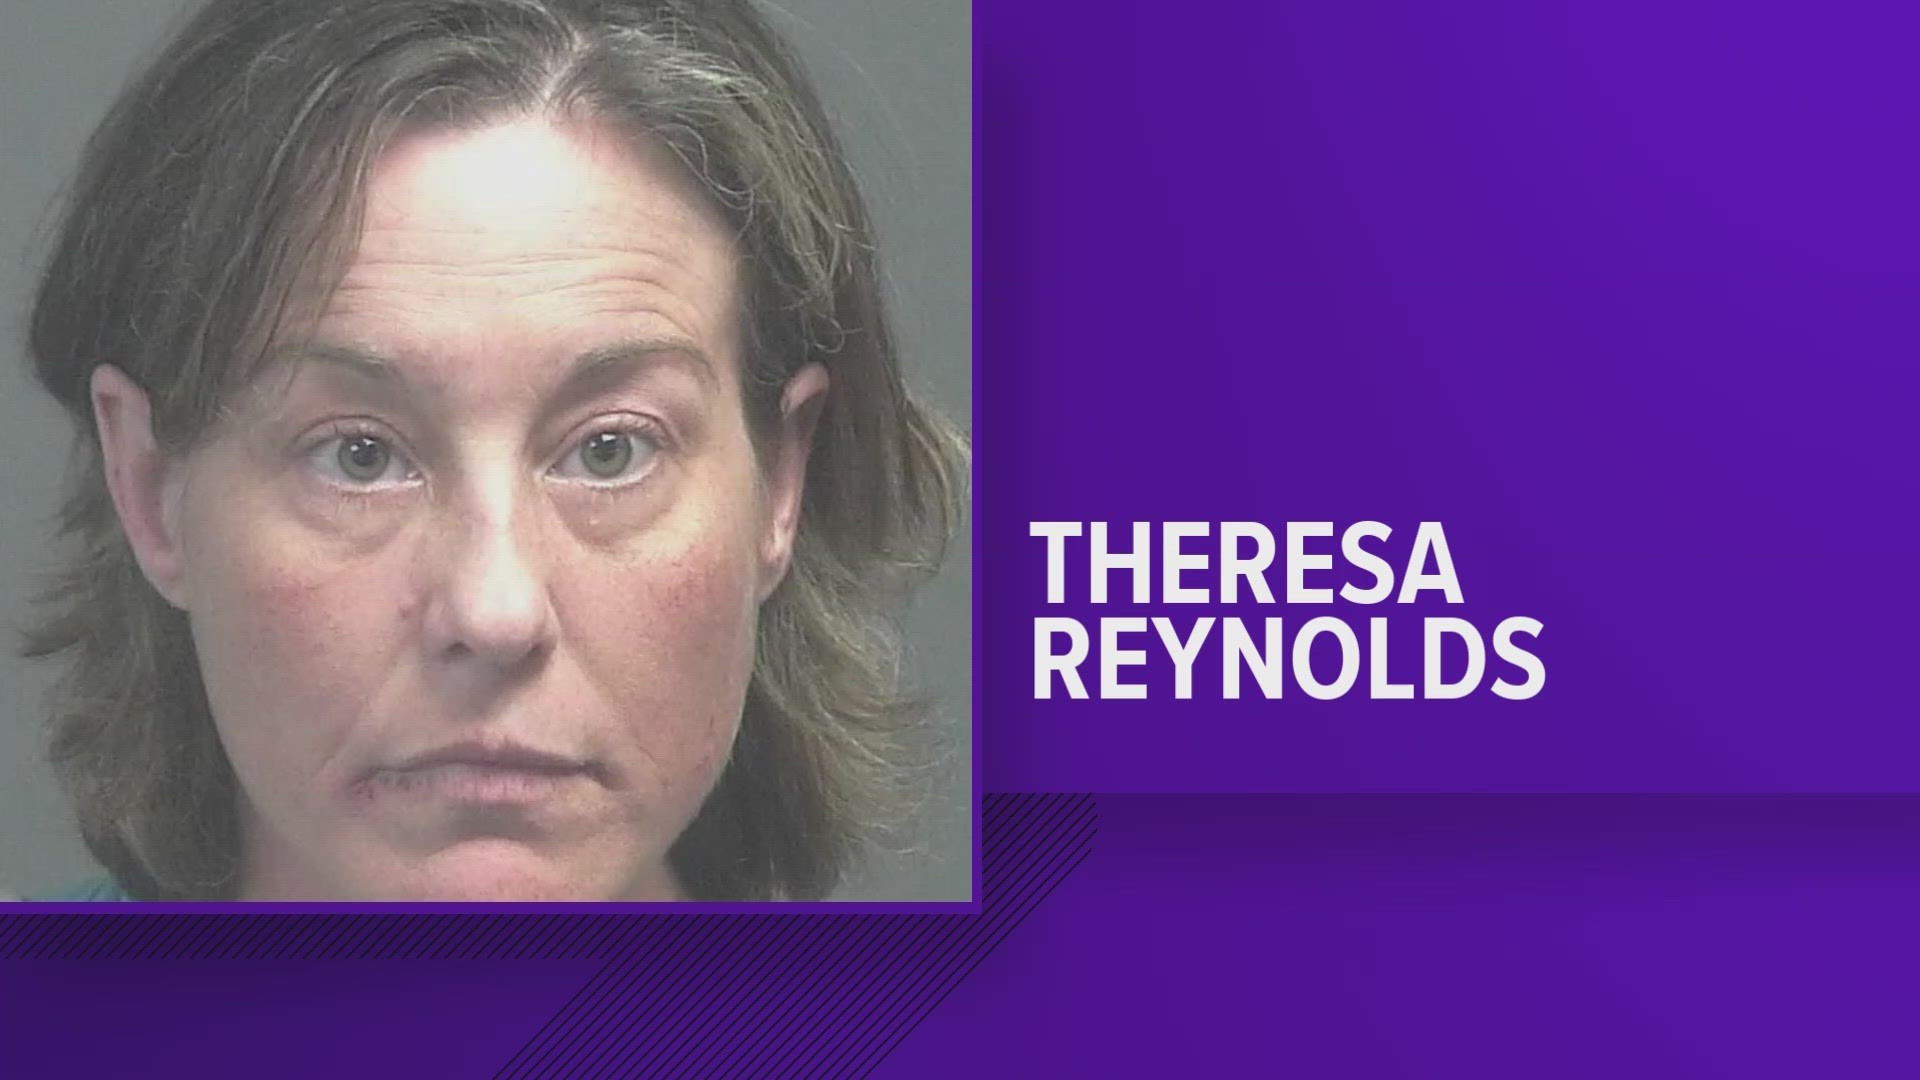 According to Blount County officials, a garbage truck was at Theresa Reynold's home to pick up her trash when she started firing at the truck.